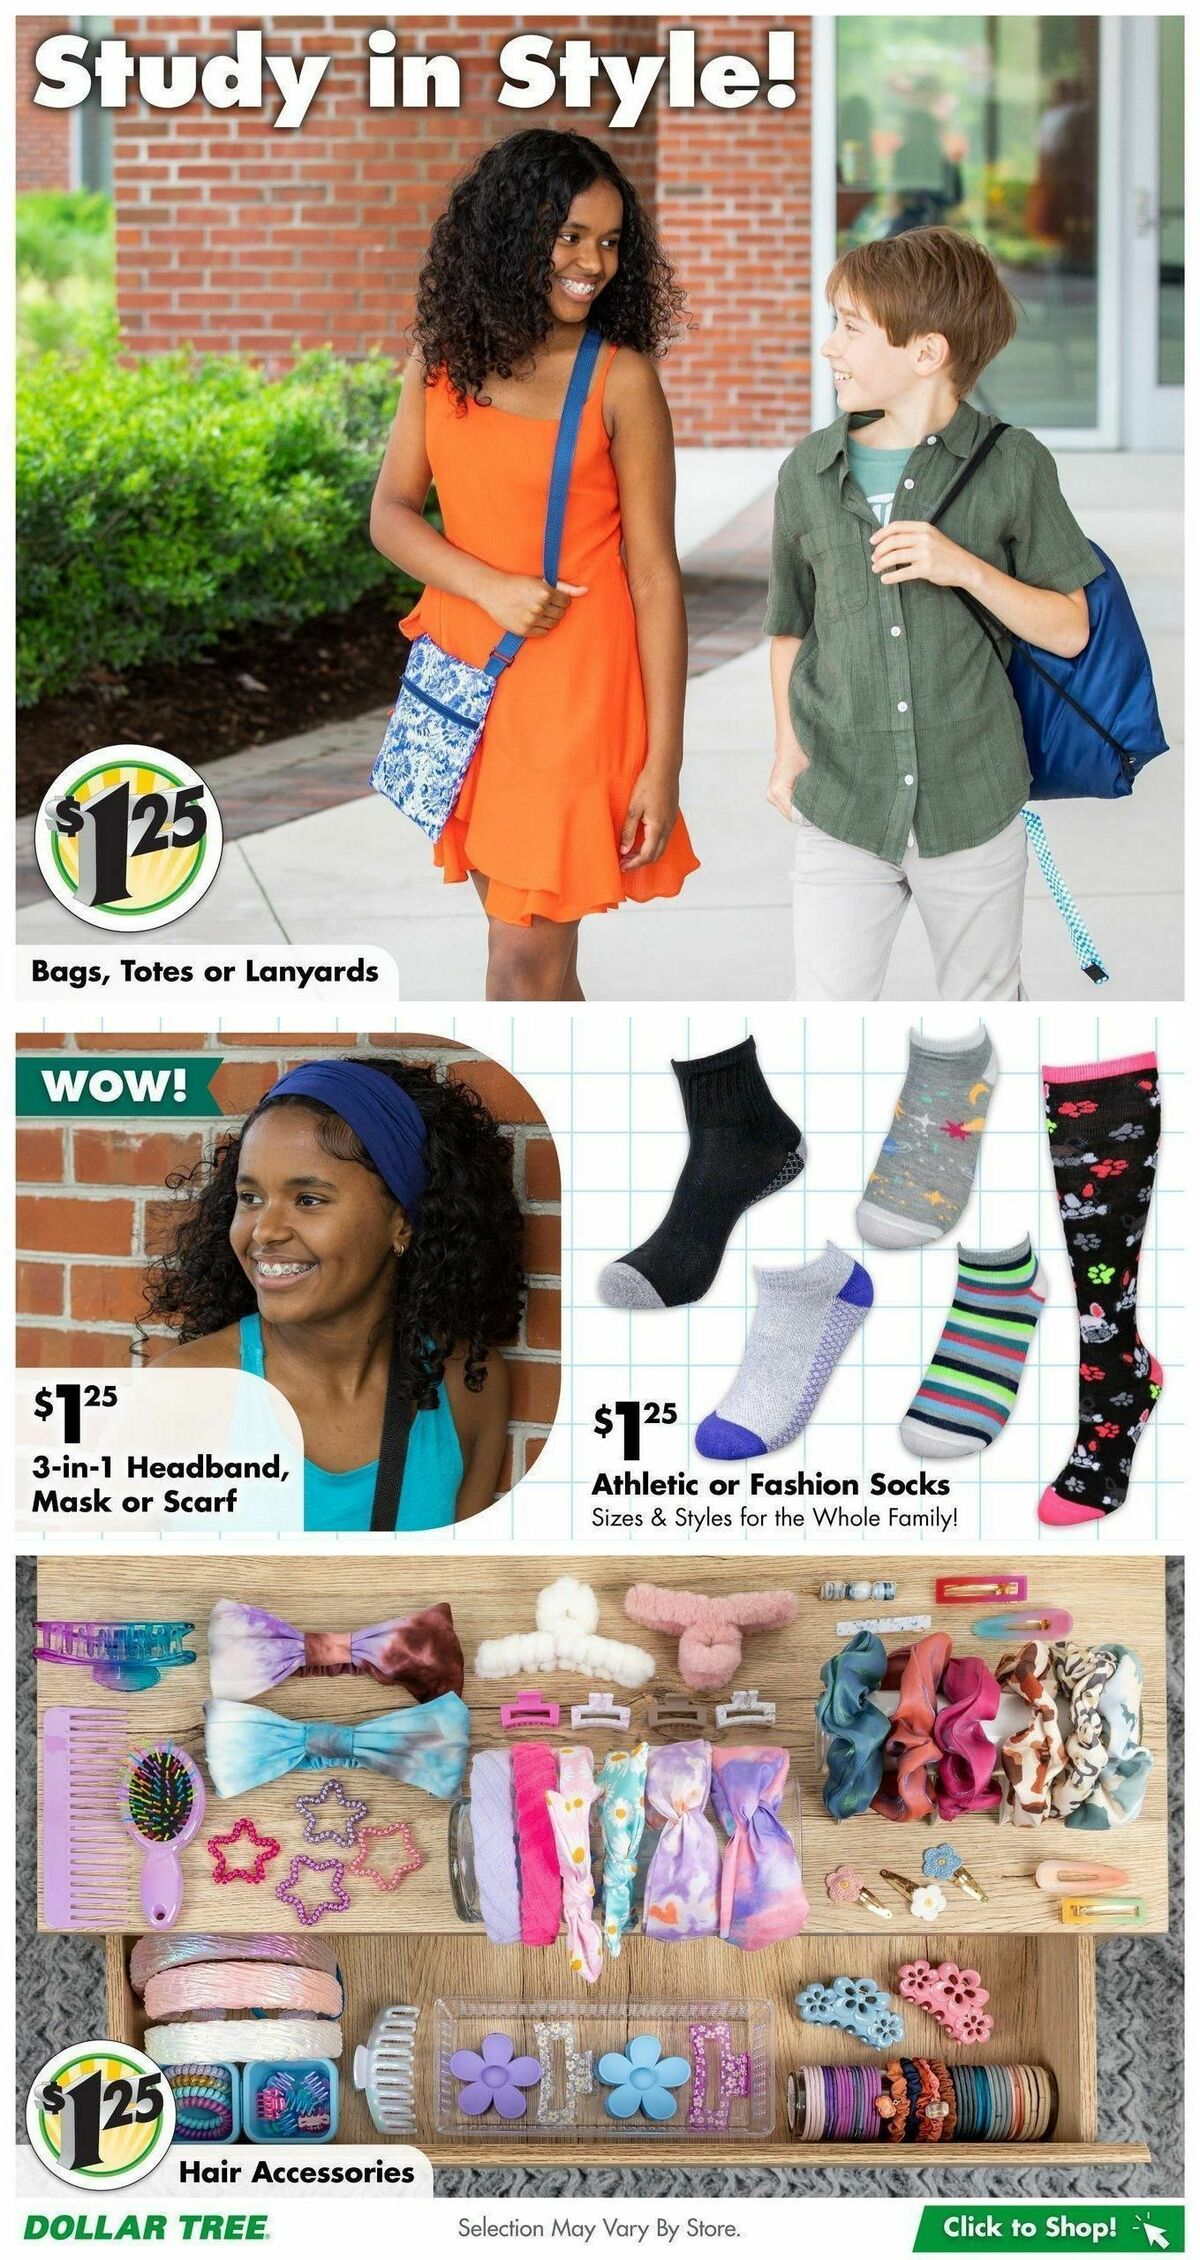 Dollar Tree Weekly Ad from August 6